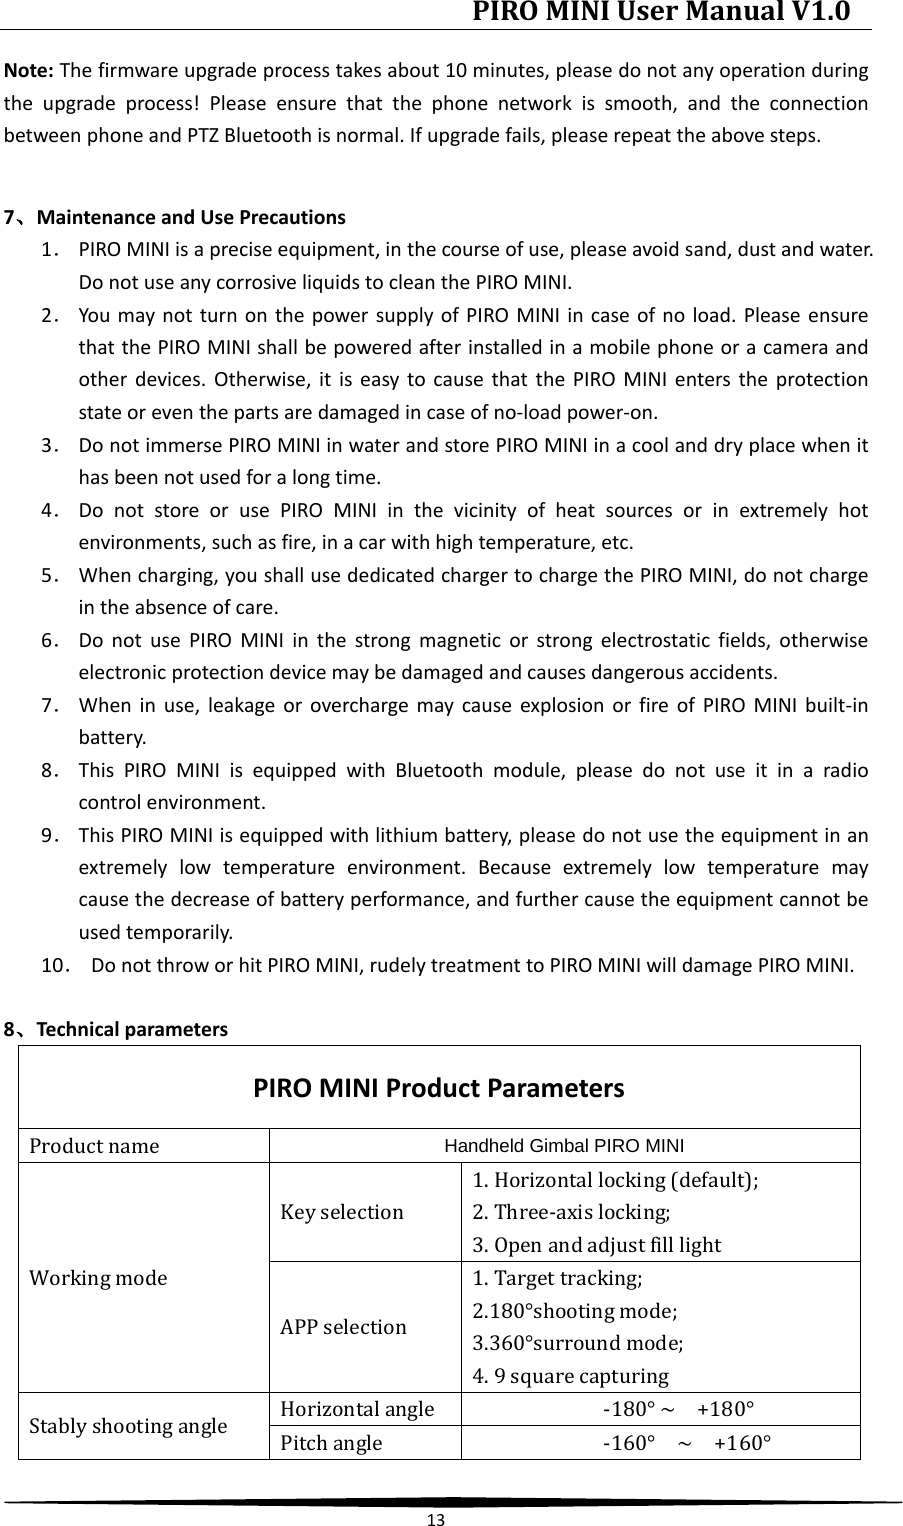 PIRO MINI User Manual V1.0  13  Note: The firmware upgrade process takes about 10 minutes, please do not any operation during the upgrade process! Please ensure that the phone network is smooth, and the connection between phone and PTZ Bluetooth is normal. If upgrade fails, please repeat the above steps.  7、Maintenance and Use Precautions 1． PIRO MINI is a precise equipment, in the course of use, please avoid sand, dust and water. Do not use any corrosive liquids to clean the PIRO MINI. 2． You may not turn on the power supply of PIRO MINI in case of no load. Please ensure that the PIRO MINI shall be powered after installed in a mobile phone or a camera and other devices. Otherwise, it is easy to cause that the PIRO MINI enters the protection state or even the parts are damaged in case of no-load power-on. 3． Do not immerse PIRO MINI in water and store PIRO MINI in a cool and dry place when it has been not used for a long time. 4． Do not store or use PIRO MINI in the vicinity of heat sources or in extremely hot environments, such as fire, in a car with high temperature, etc. 5． When charging, you shall use dedicated charger to charge the PIRO MINI, do not charge in the absence of care. 6． Do not use PIRO MINI in the strong magnetic or strong electrostatic fields, otherwise electronic protection device may be damaged and causes dangerous accidents. 7． When in use, leakage or overcharge may cause explosion or fire of PIRO MINI built-in battery. 8． This PIRO MINI is equipped  with Bluetooth module, please do not use it in a radio control environment. 9． This PIRO MINI is equipped with lithium battery, please do not use the equipment in an extremely low temperature environment. Because extremely low temperature may cause the decrease of battery performance, and further cause the equipment cannot be used temporarily. 10． Do not throw or hit PIRO MINI, rudely treatment to PIRO MINI will damage PIRO MINI.  8、Technical parameters PIRO MINI Product Parameters Product name Handheld Gimbal PIRO MINI      Working mode Key selection 1. Horizontal locking (default);   2. Three-axis locking;   3. Open and adjust fill light APP selection 1. Target tracking;   2.180°shooting mode; 3.360°surround mode;   4. 9 square capturing Stably shooting angle Horizontal angle -180° ~  +180° Pitch angle -160°  ~  +160° 